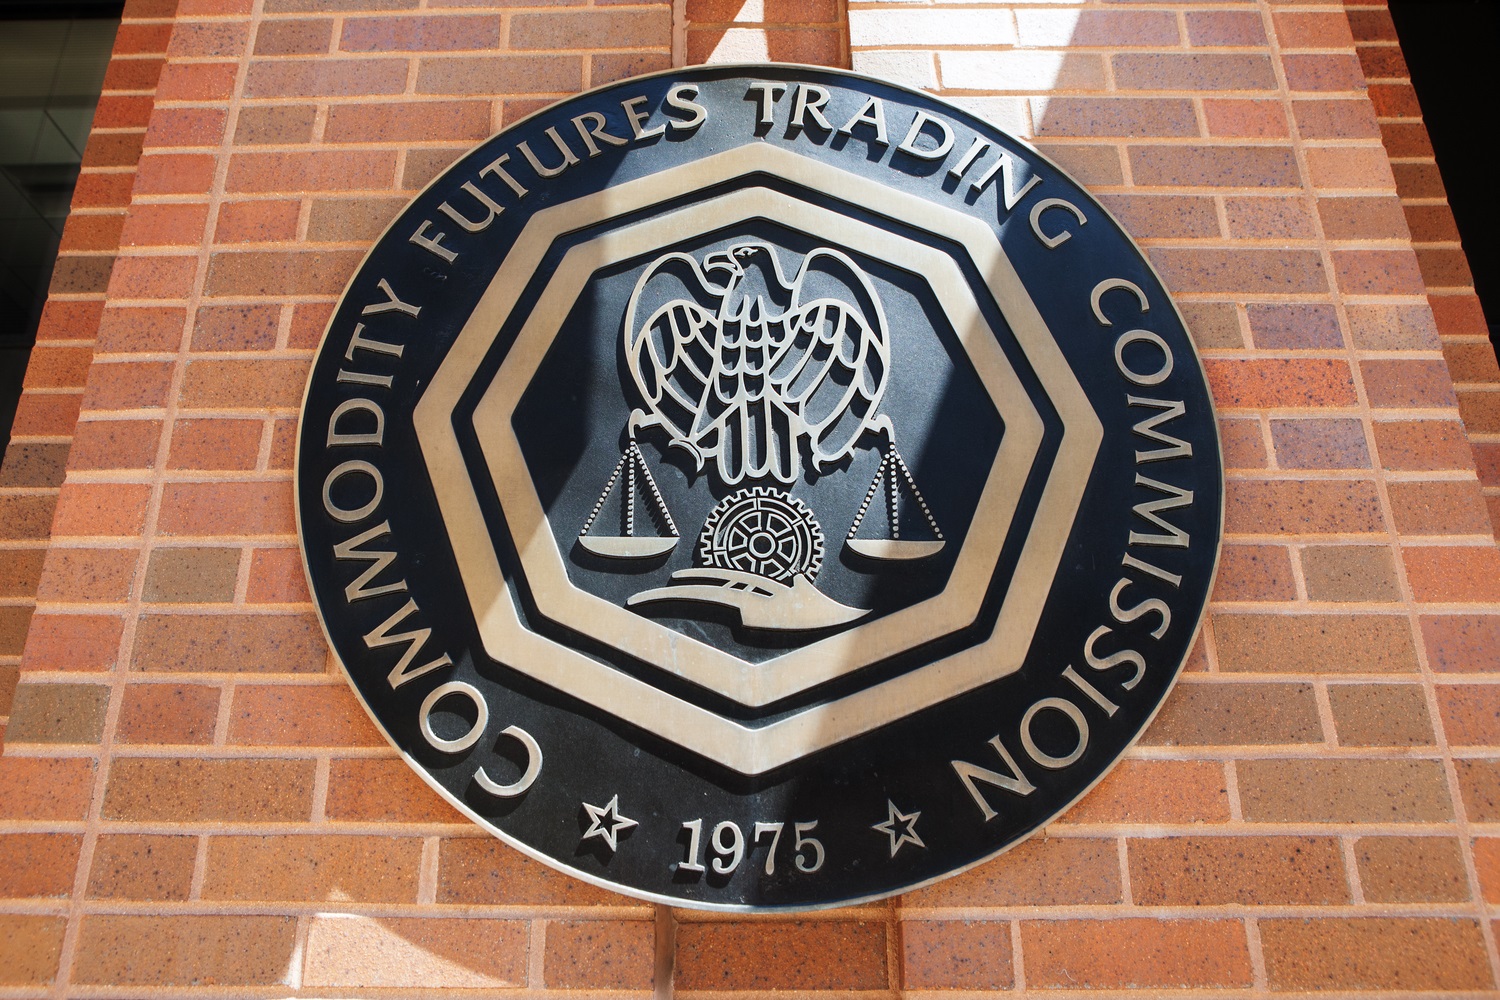 Cftc-alleges-4-individuals-defrauded-customers-in-$1m-bitcoin-trading-scheme